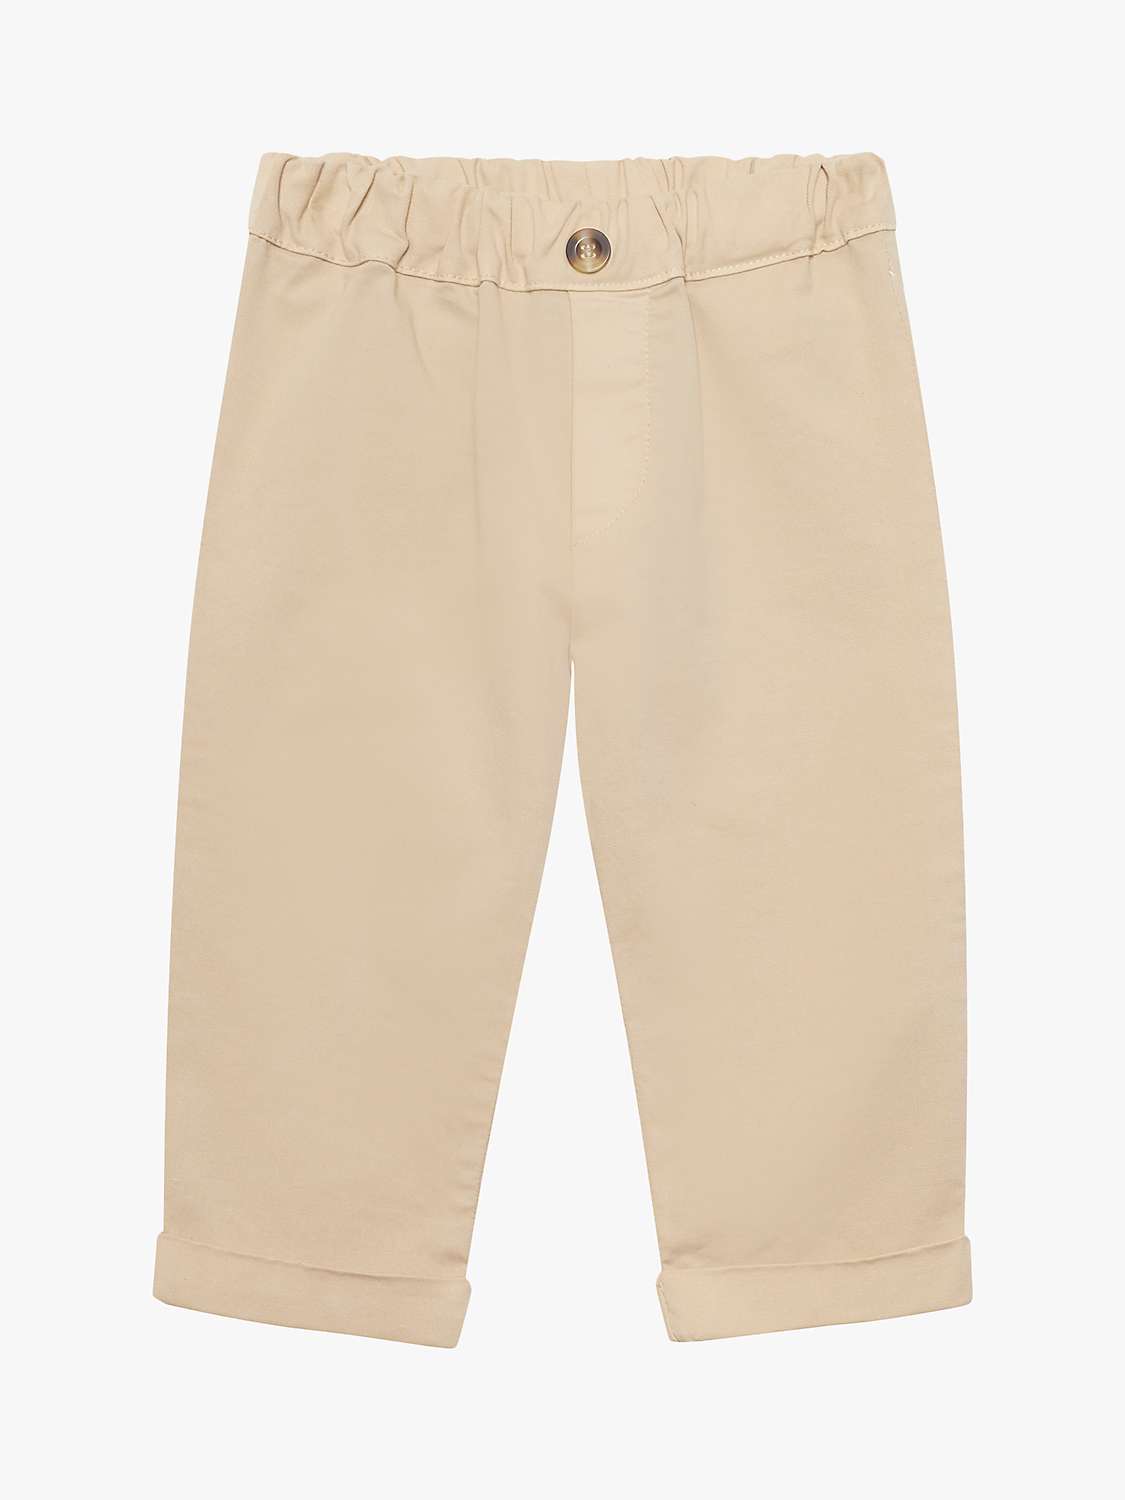 Buy Trotters Baby Orly Cotton Blend Trousers, Camel Online at johnlewis.com